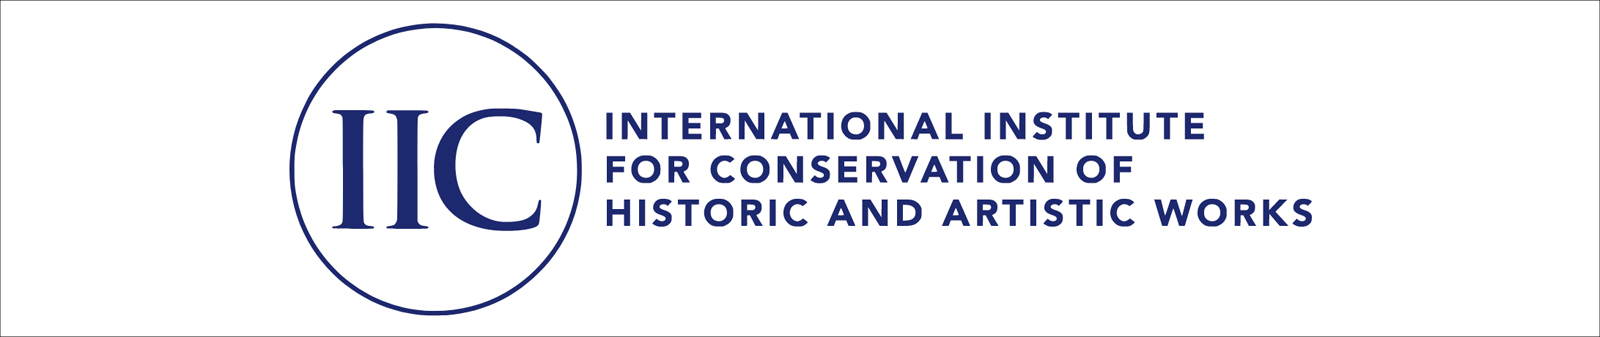 International Institute for Conservation of Historic and Artistic Works